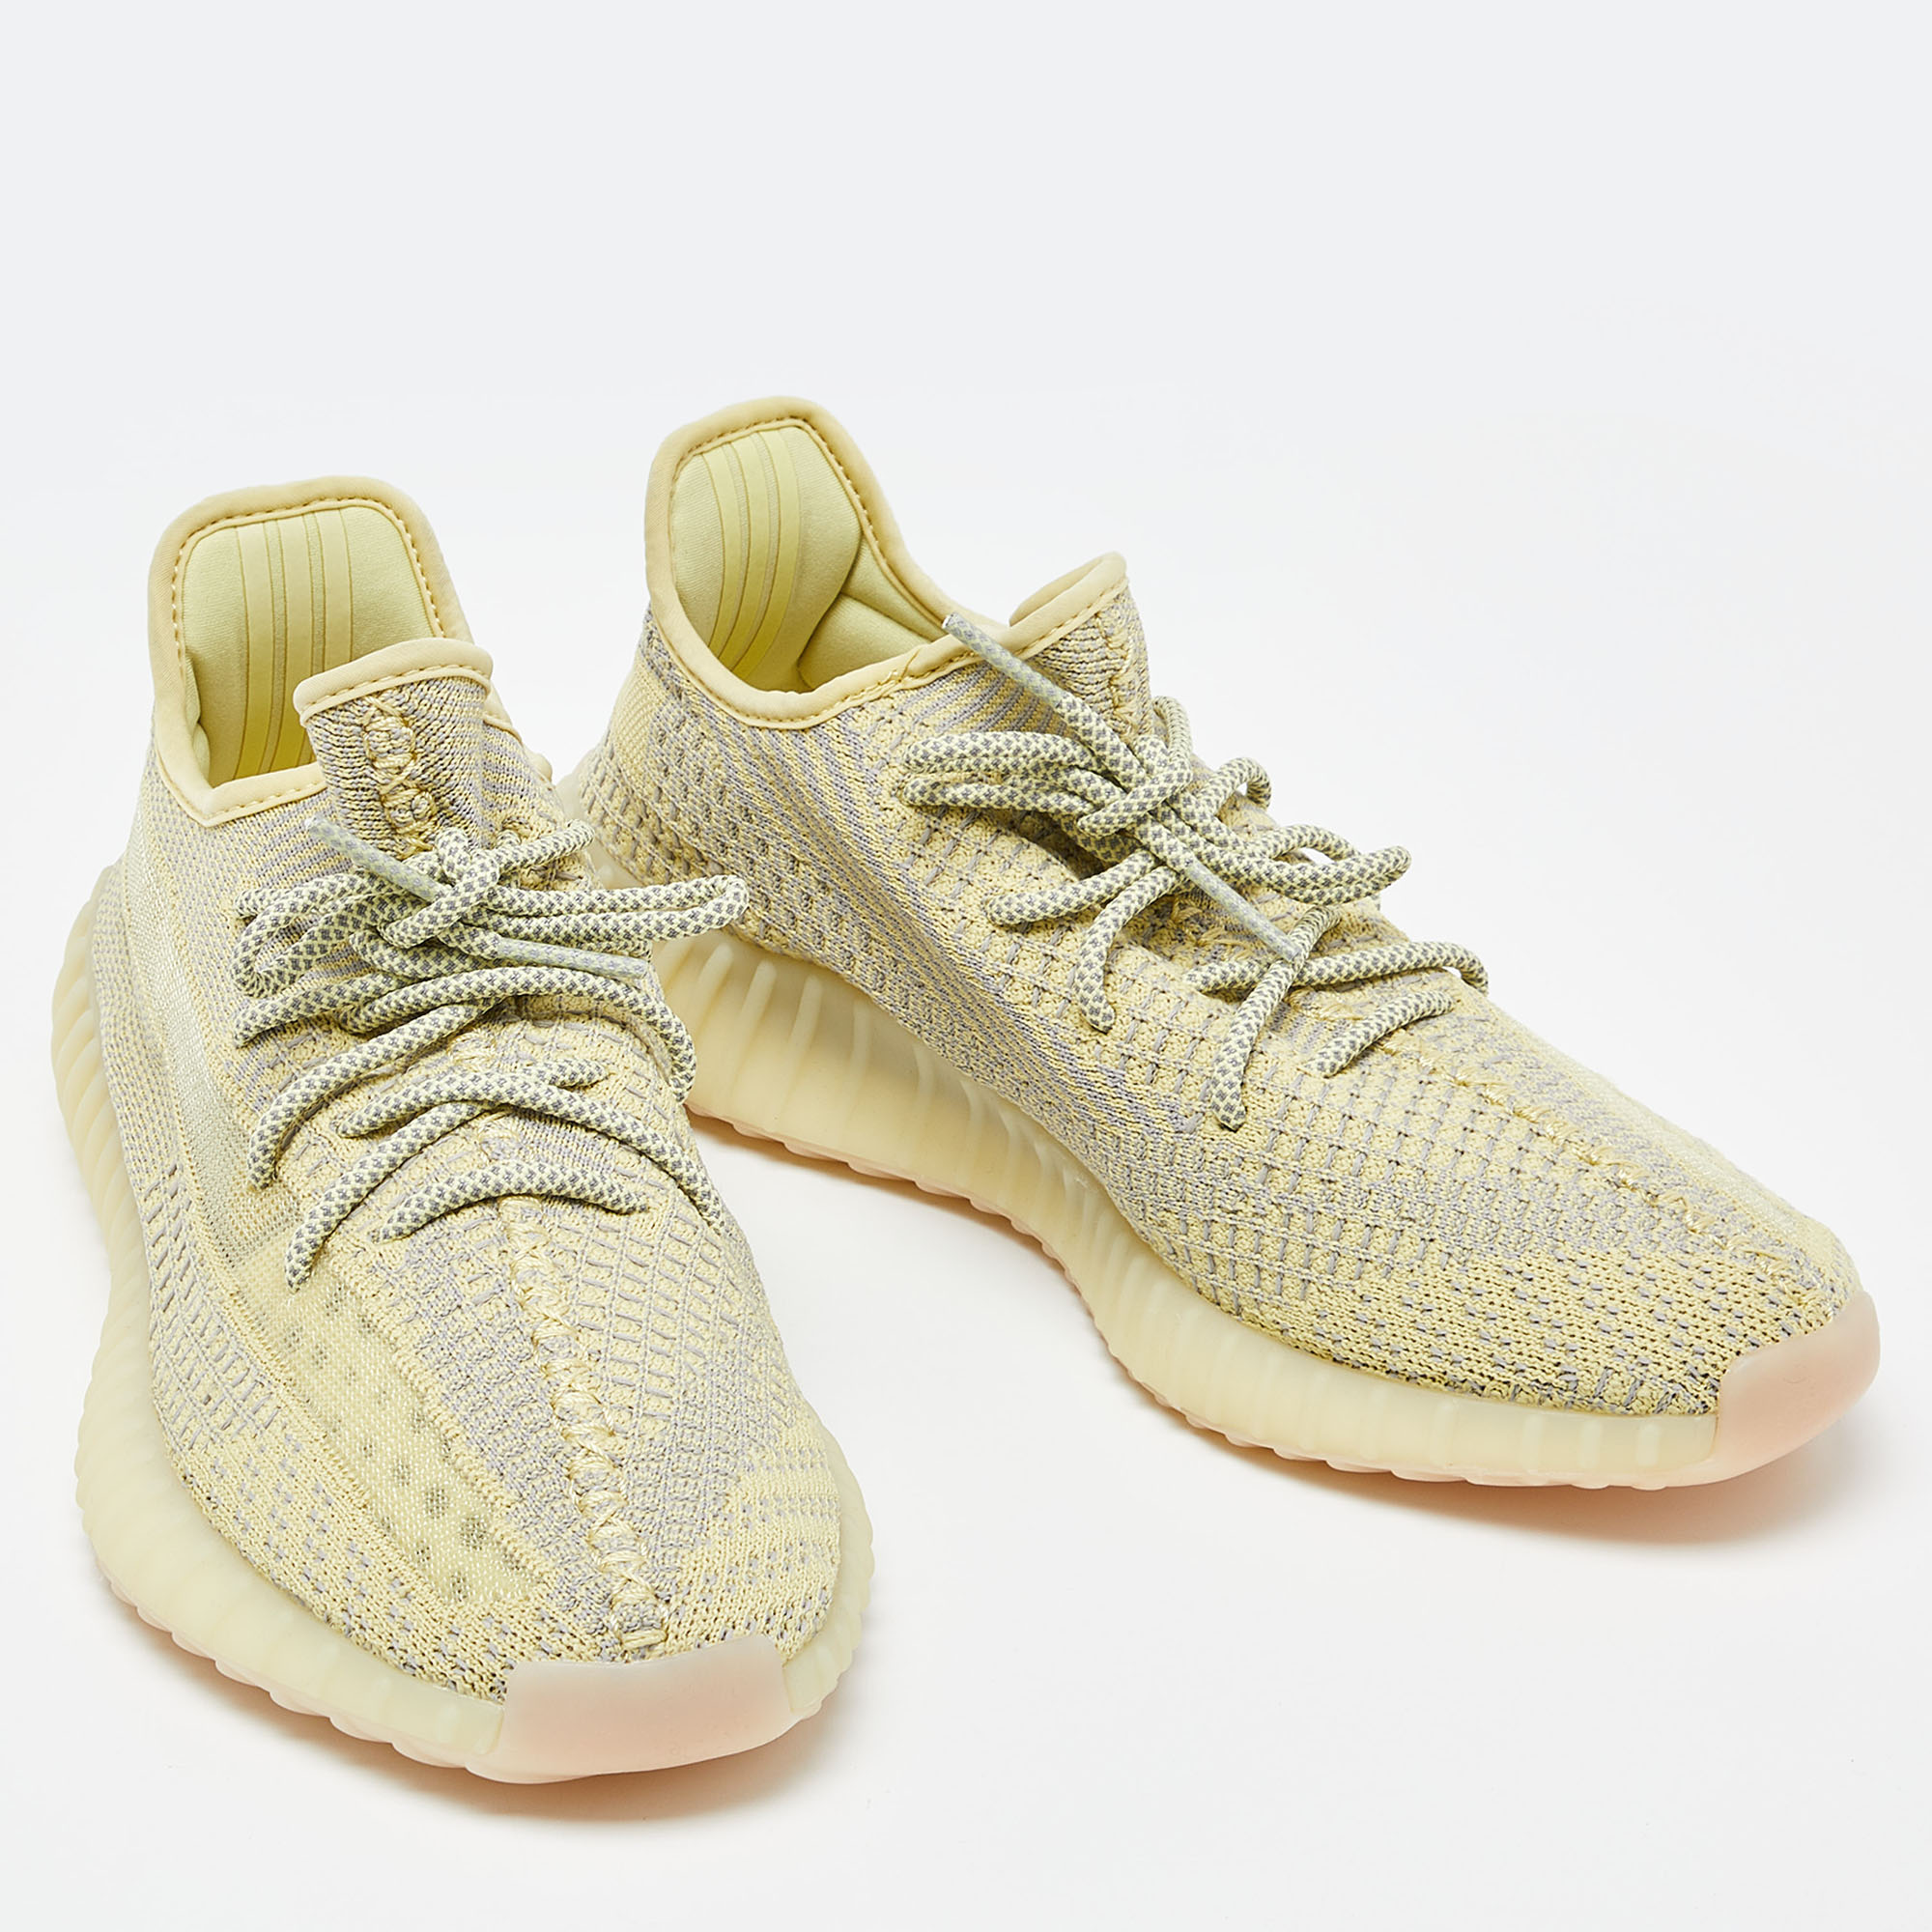 Yeezy X Adidas Yellow/Grey Knit Fabric Boost 350 V2 Antlia Non-Reflective Sneakers Size 45 1/3